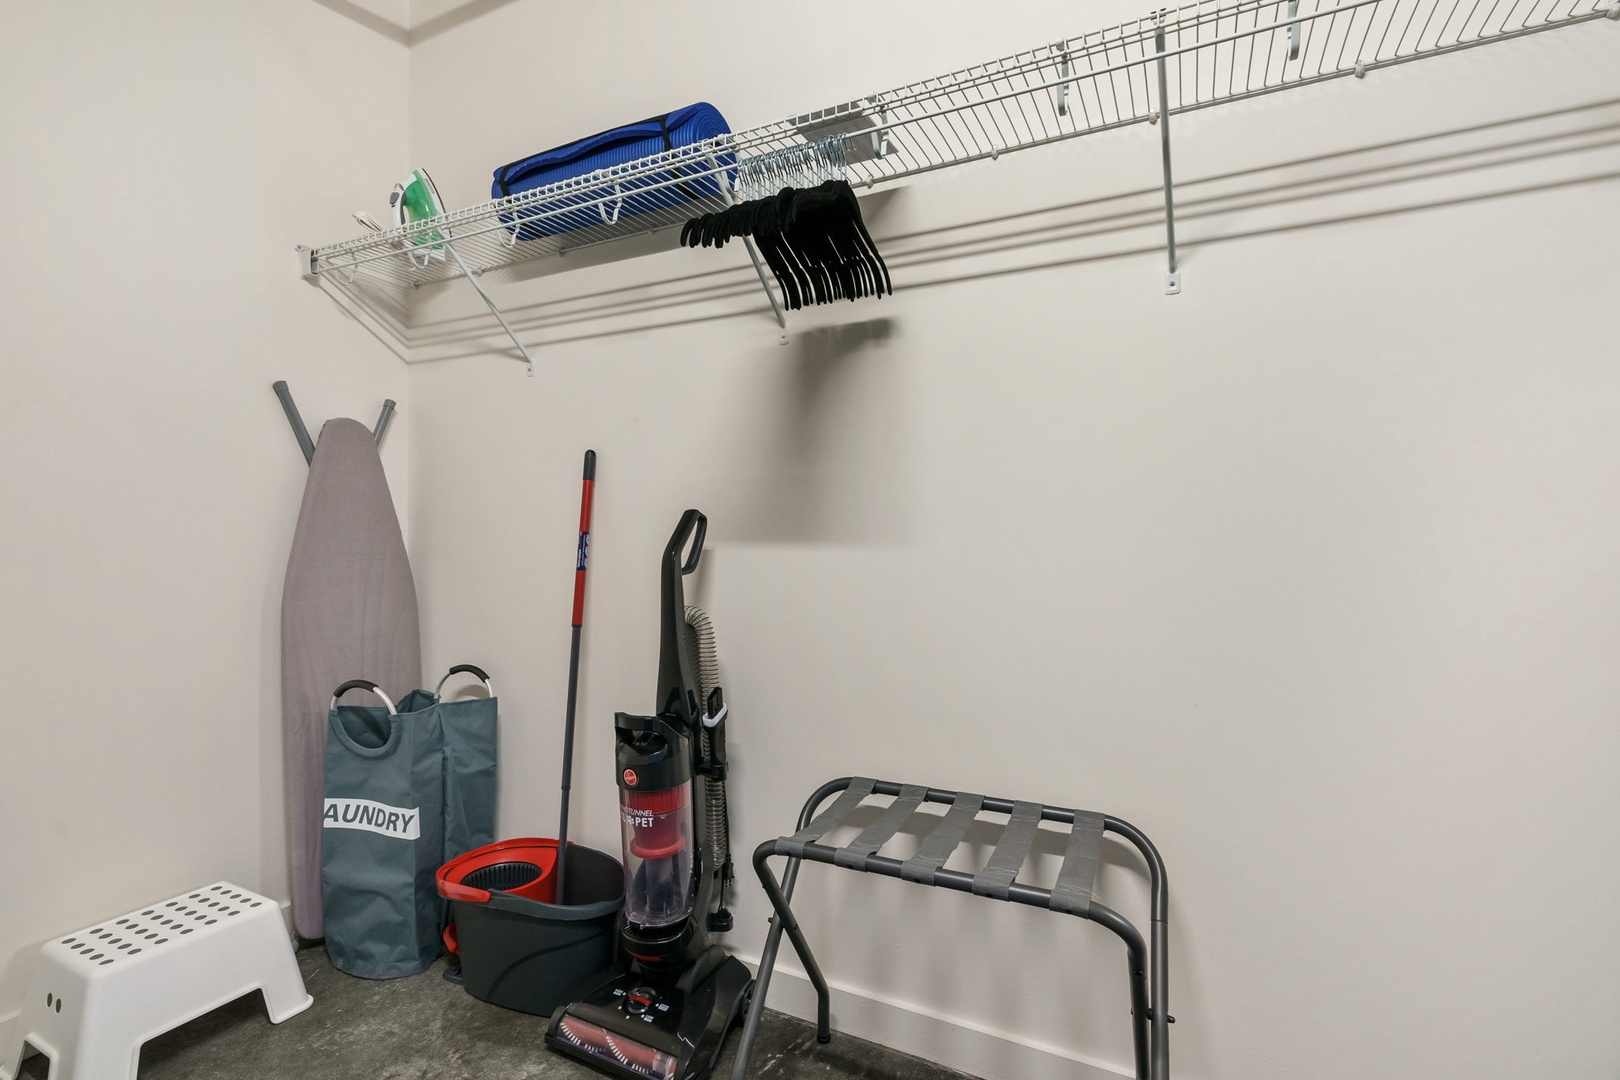 Unpack and stay organized with the spacious walk-in closet.